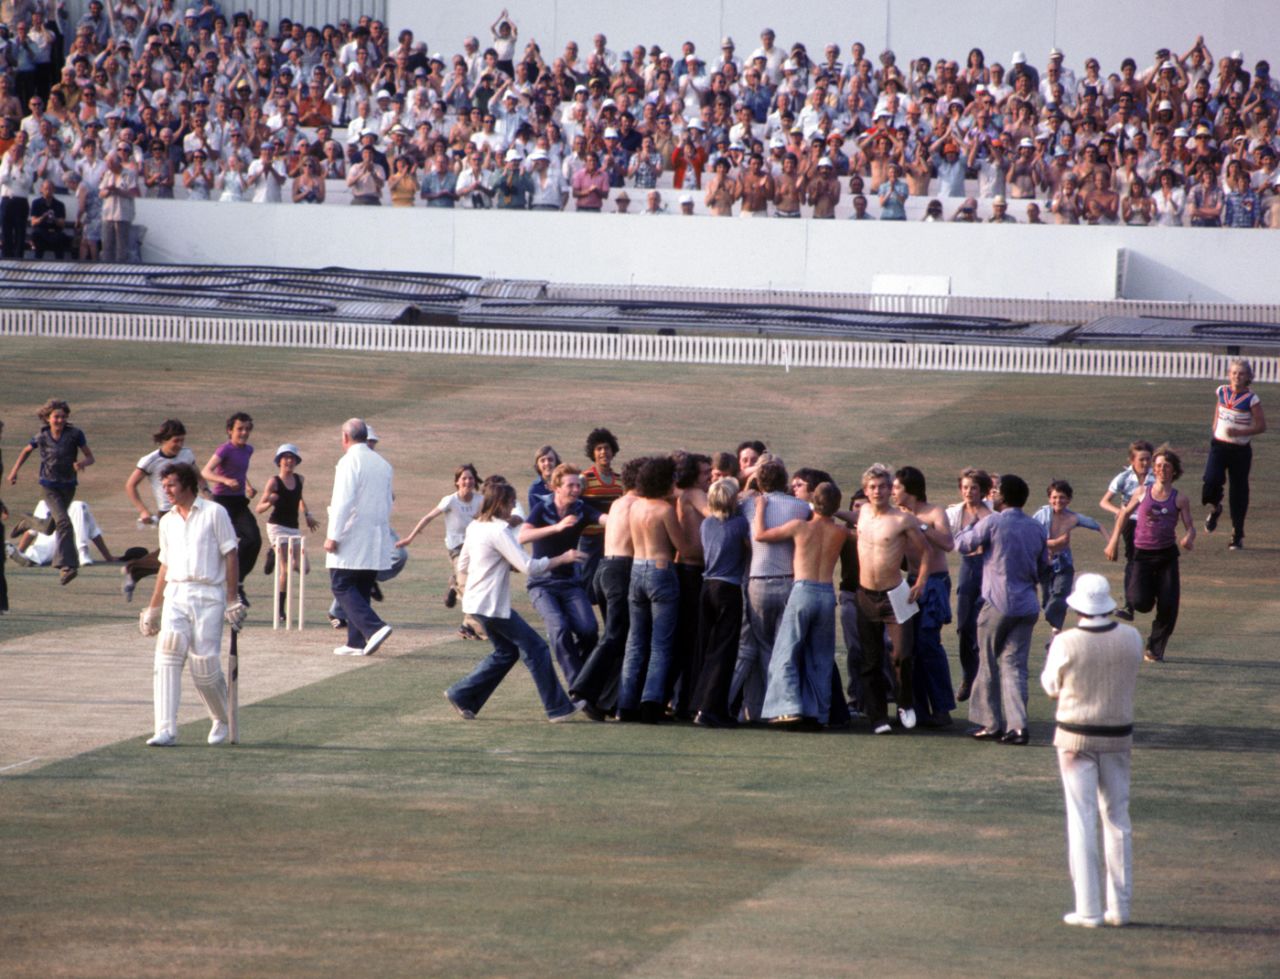 Geoff Boycott is surrounded by fans after completing his 100th first-class hundred, England v Australia, 4th Test, Headingley, August 11, 1977 